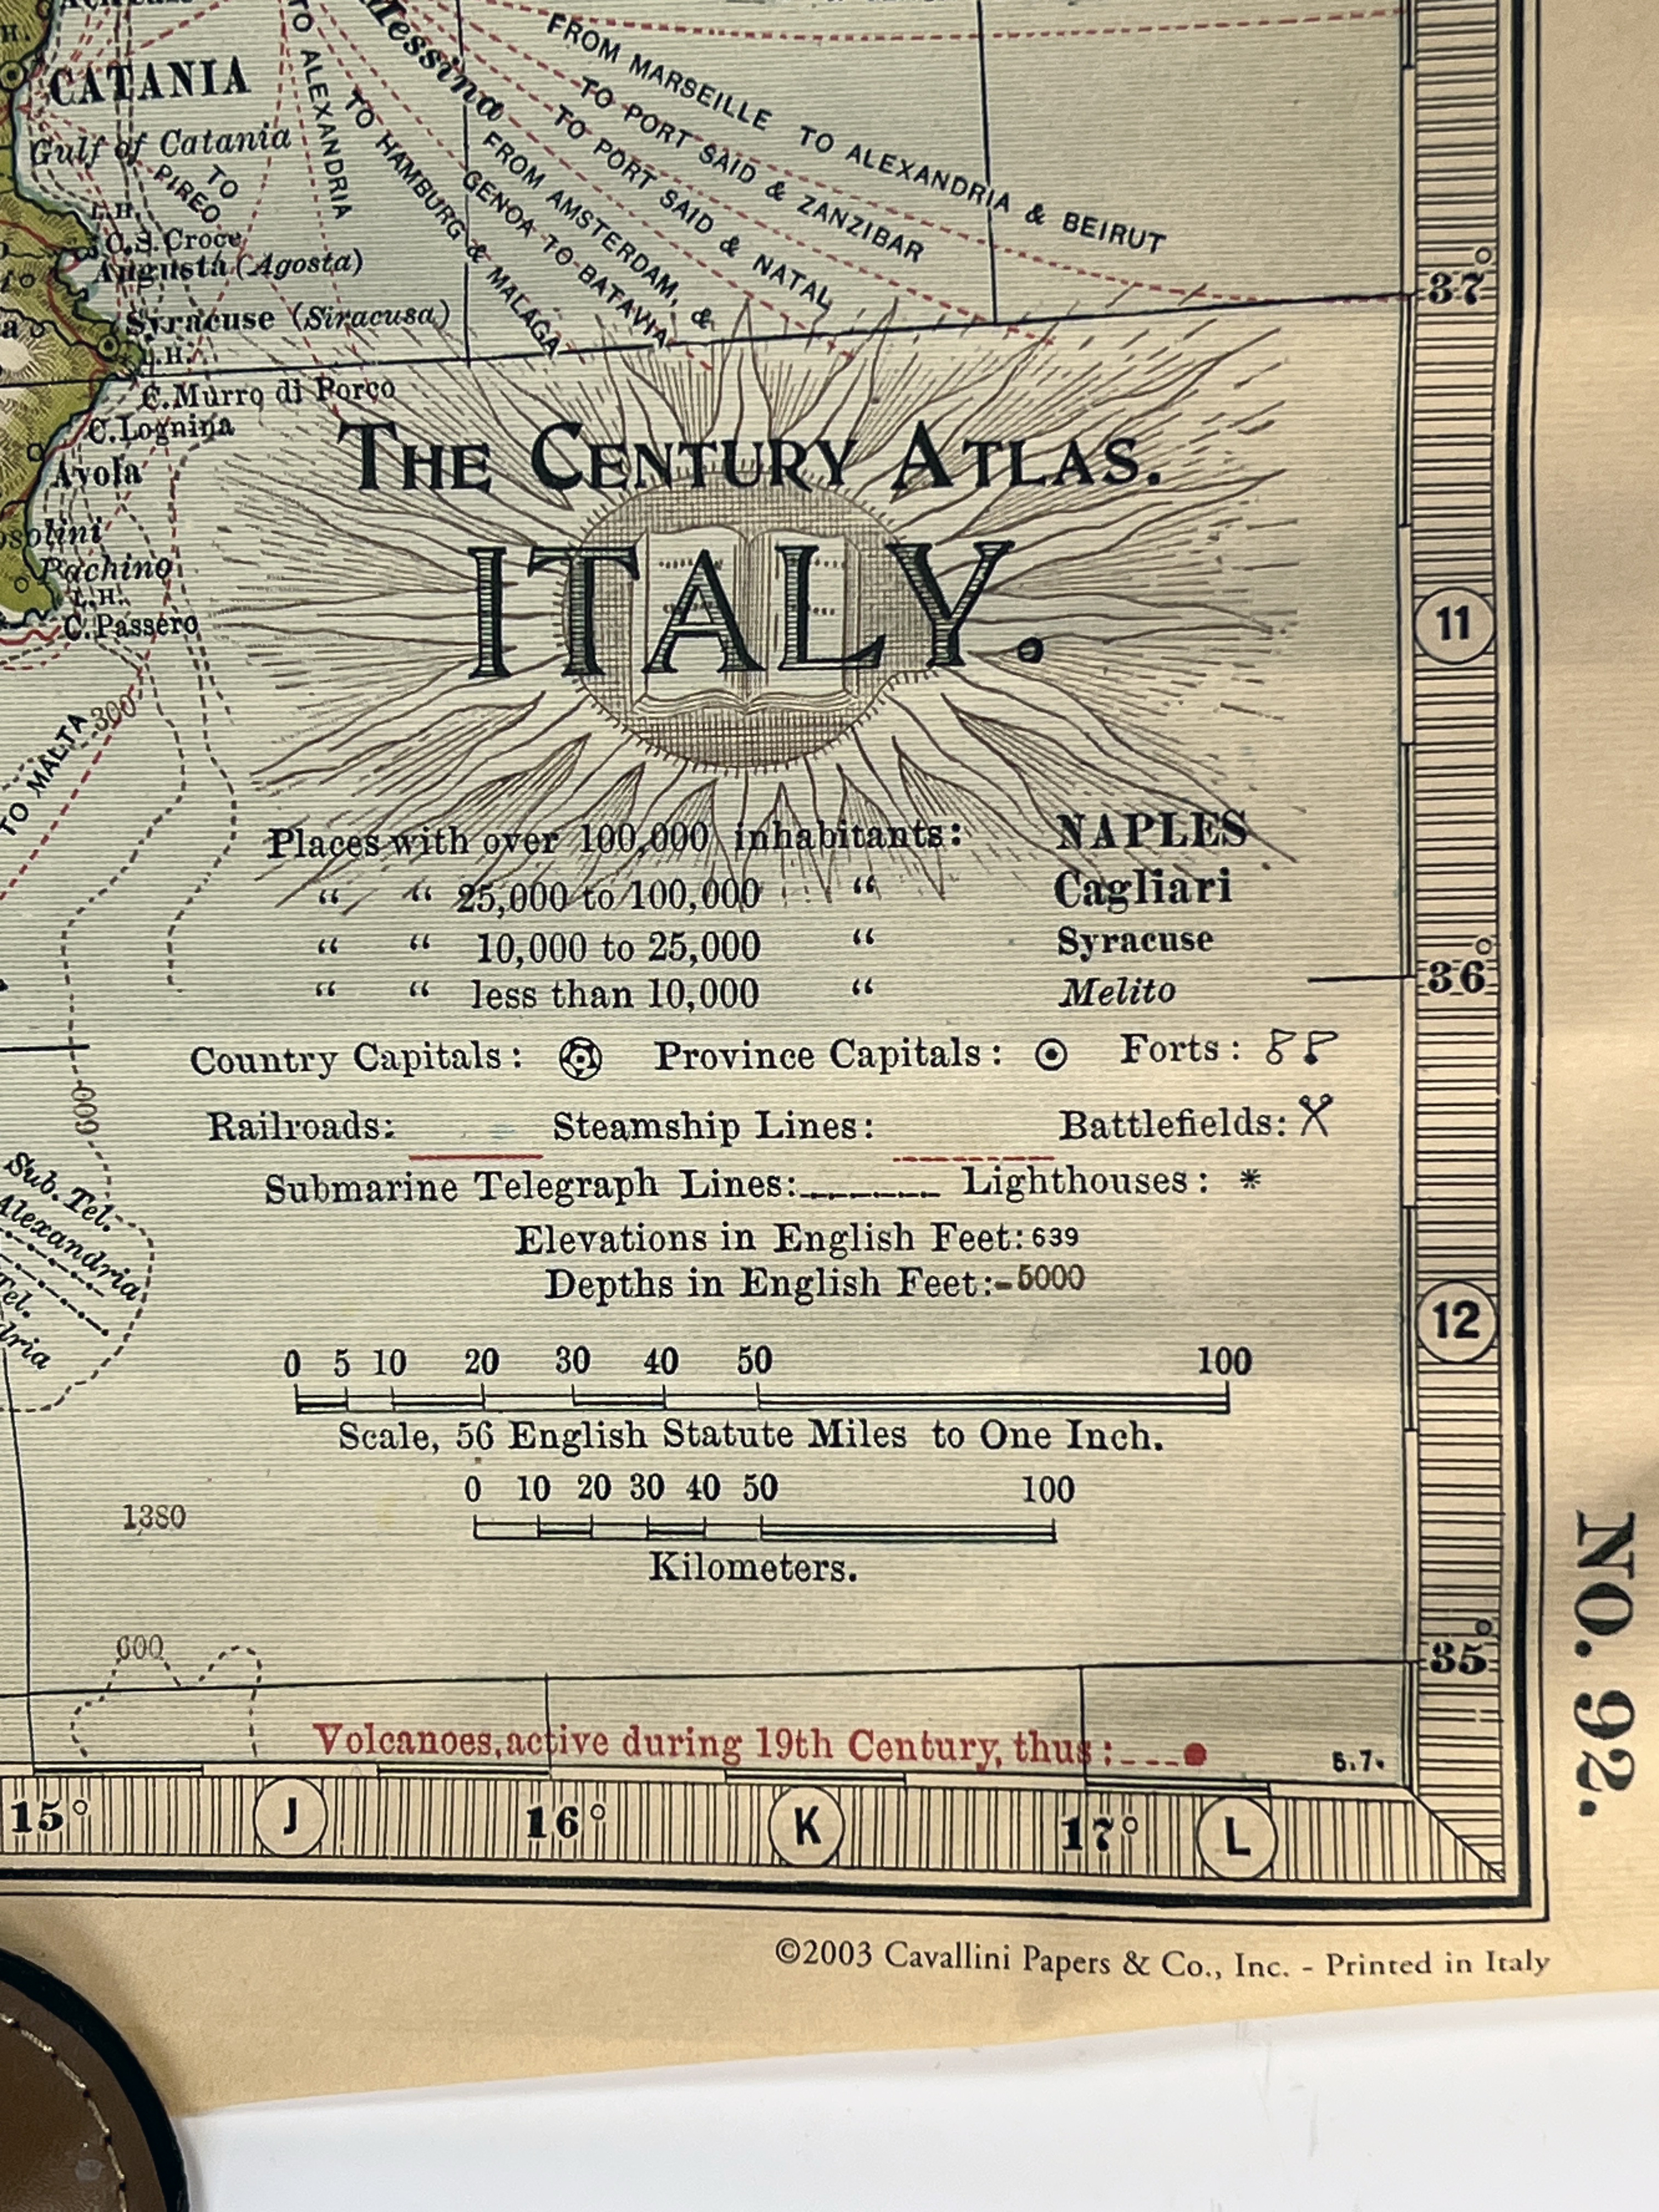 The Century Atlas Map Of Italy  image 2